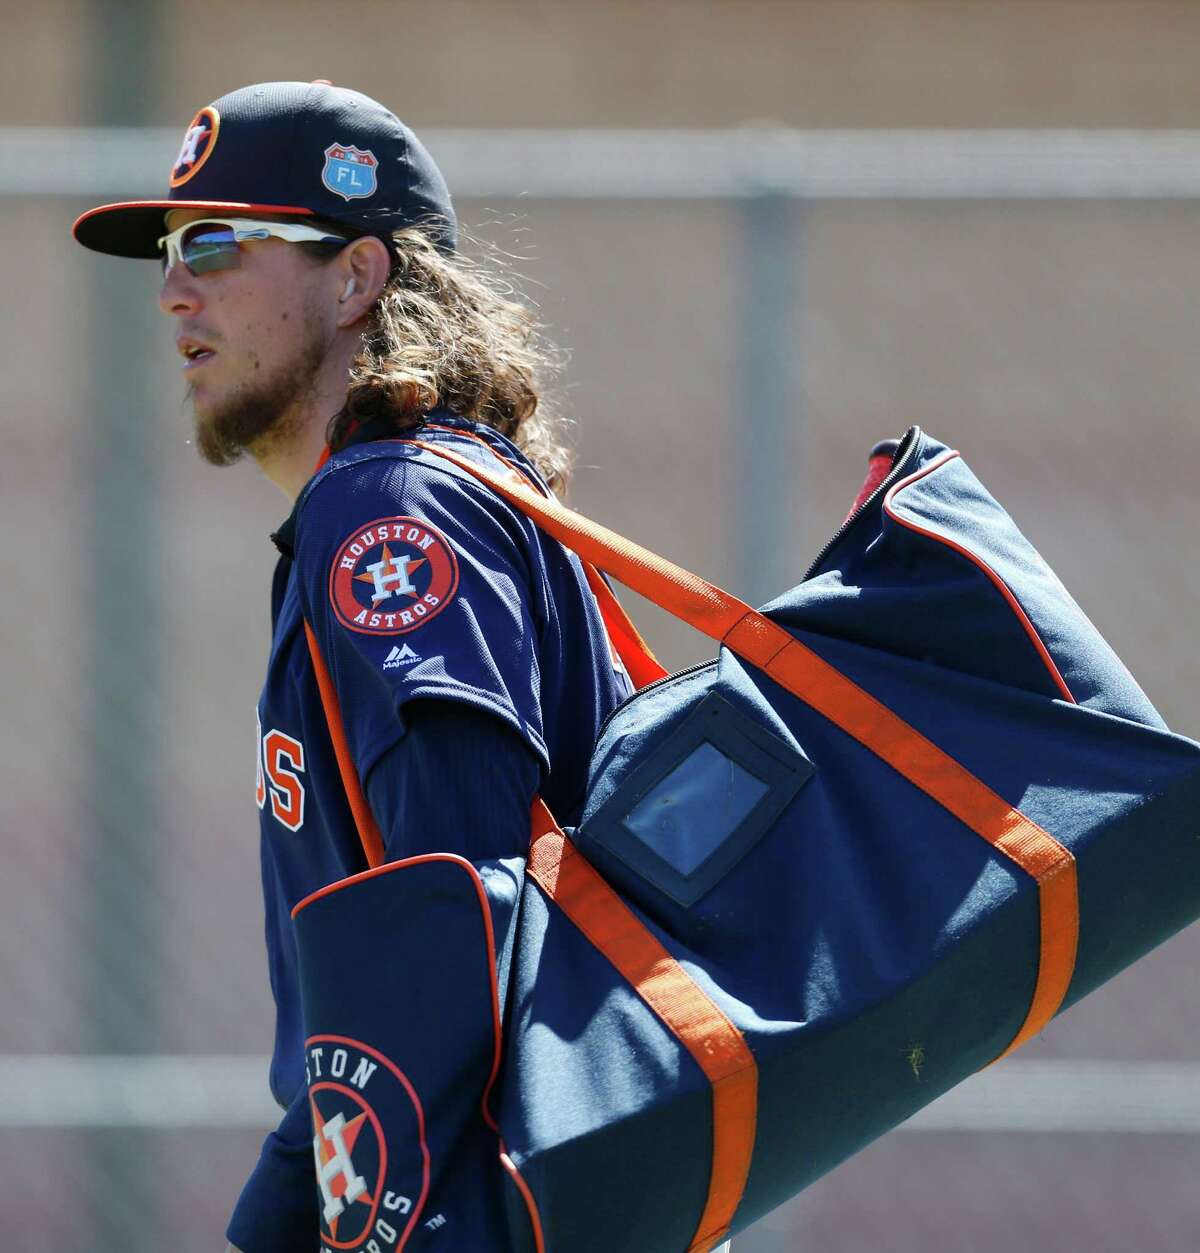 Houston Astros outfielder Colby Rasmus at the Astros spring training in Kissimmee, Florida, Saturday, Feb. 27, 2016.